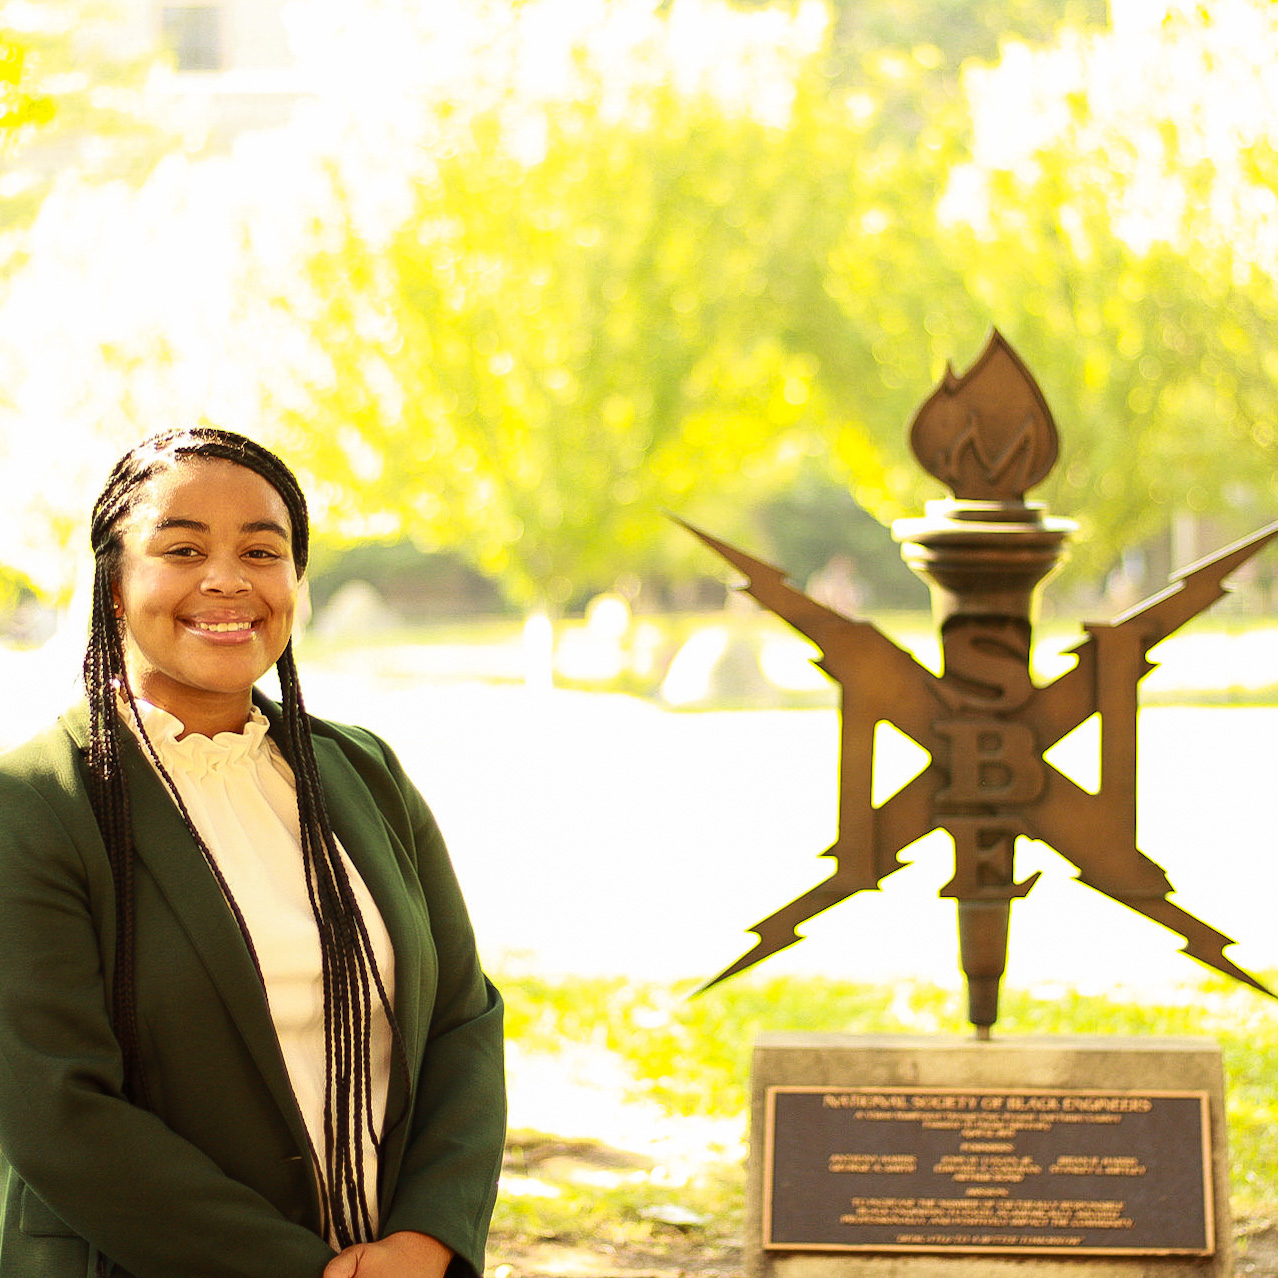 National Society of Black Engineers member standing infront of the NSBE sign